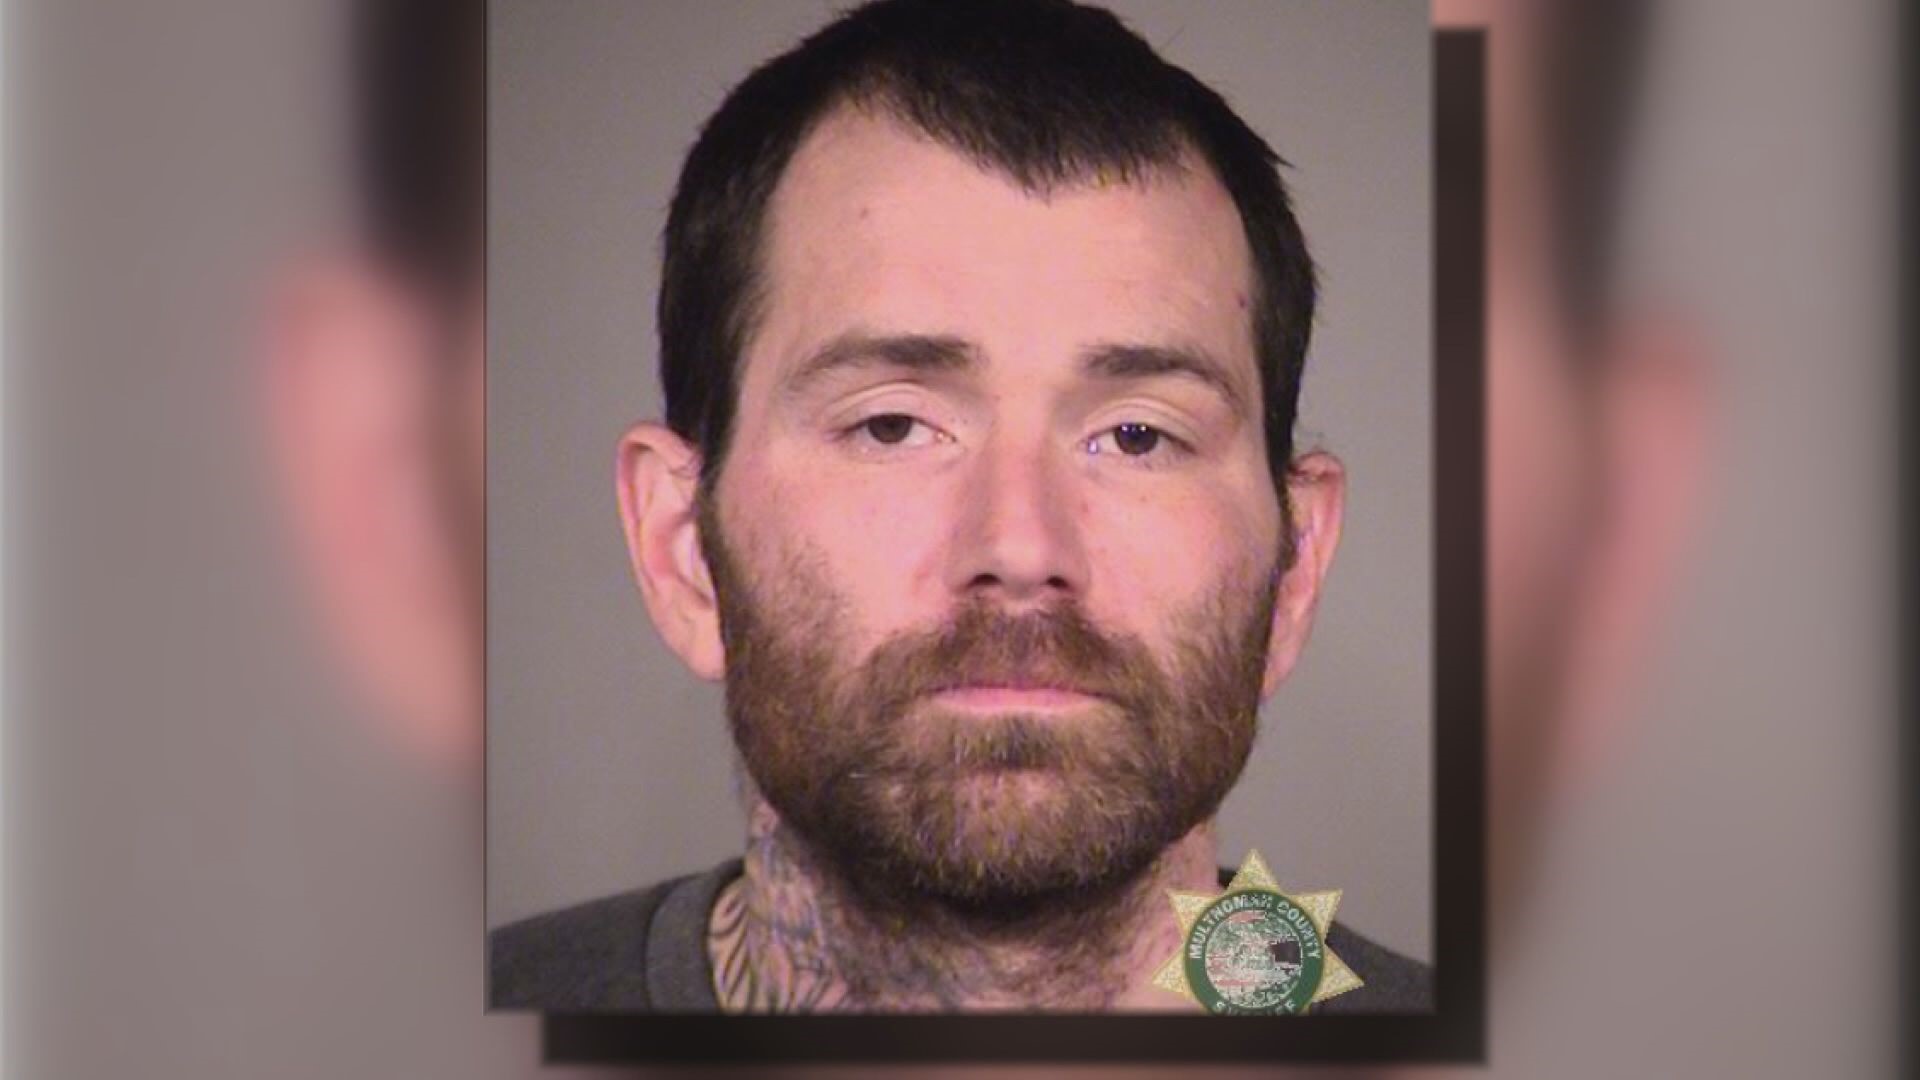 The suspect, Christopher Lee Pray, 39, escaped custody Wednesday night. He was apprehended Friday when he was found stuck in mud in north Portland.